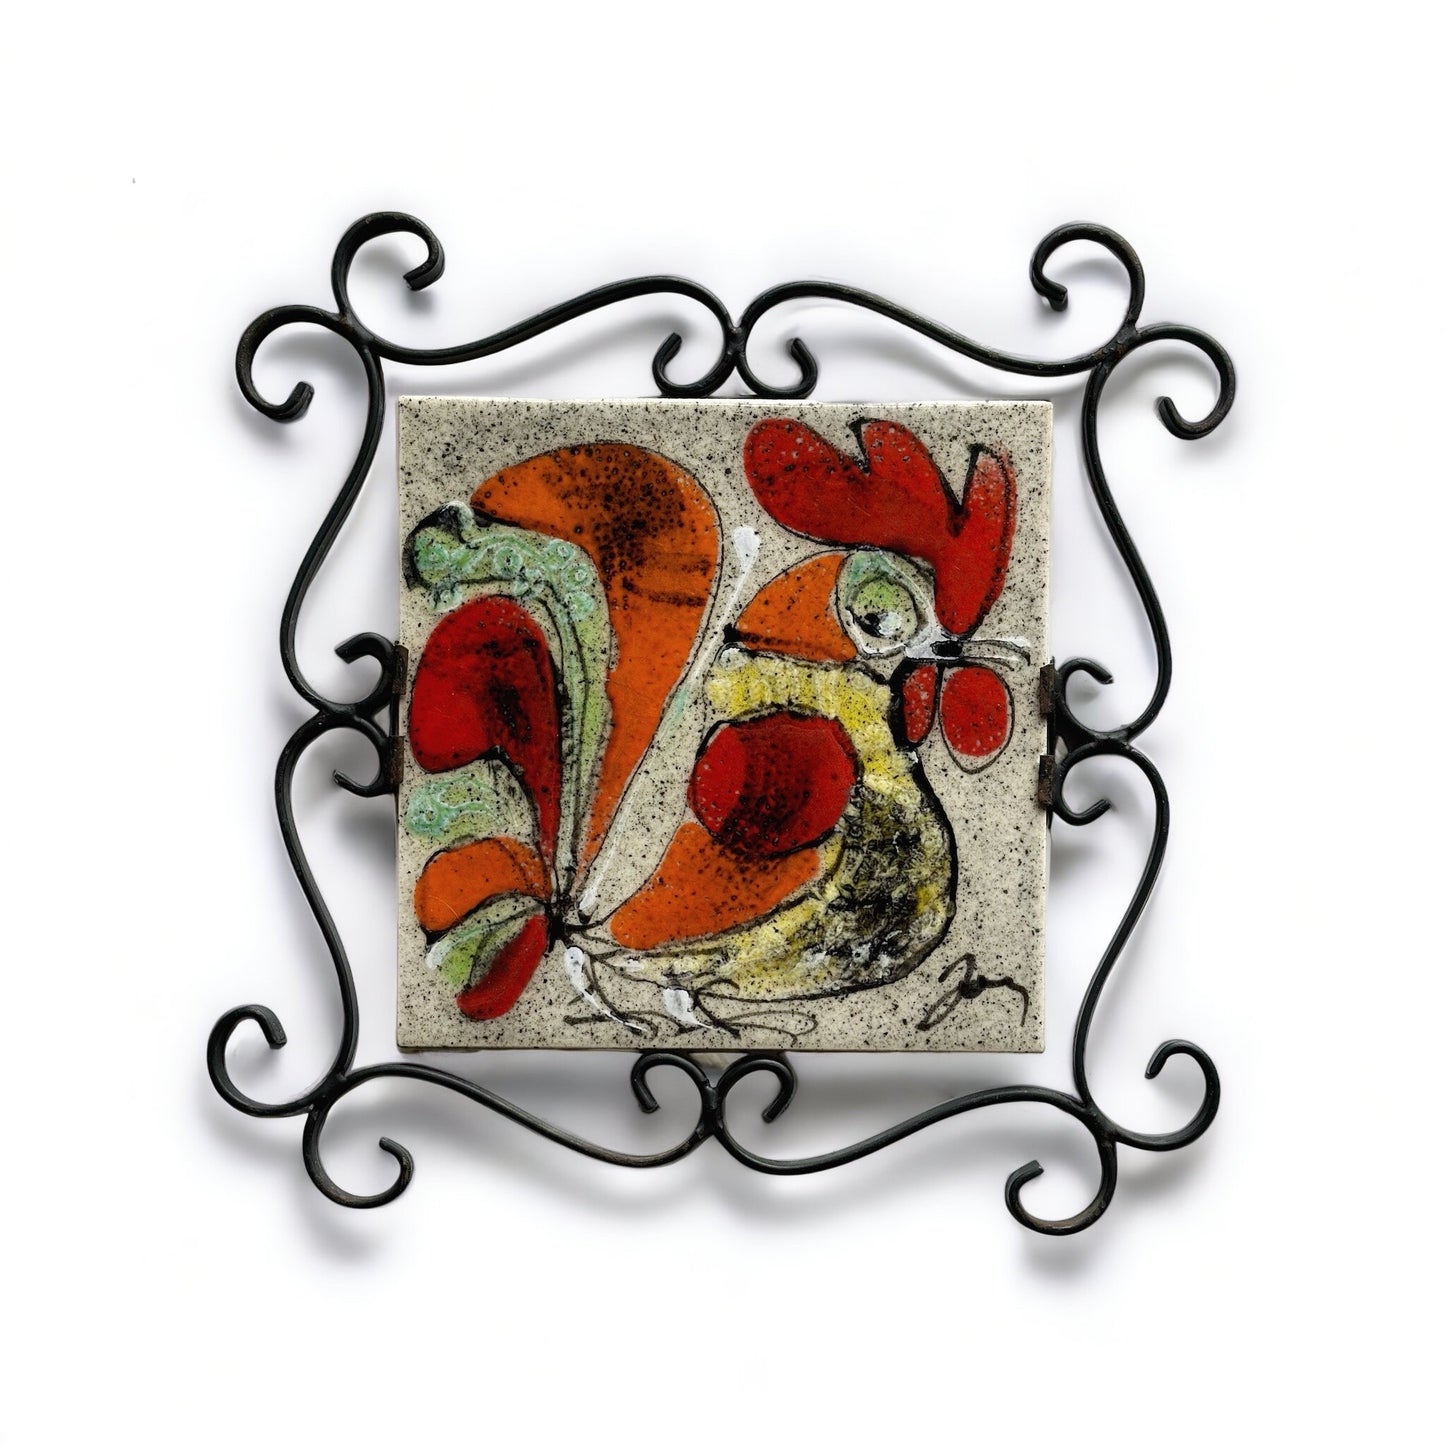 Delassus Fourmaintraux Desvres French earthenware tile Trivet 1960s 70s with Wrought Iron Frame